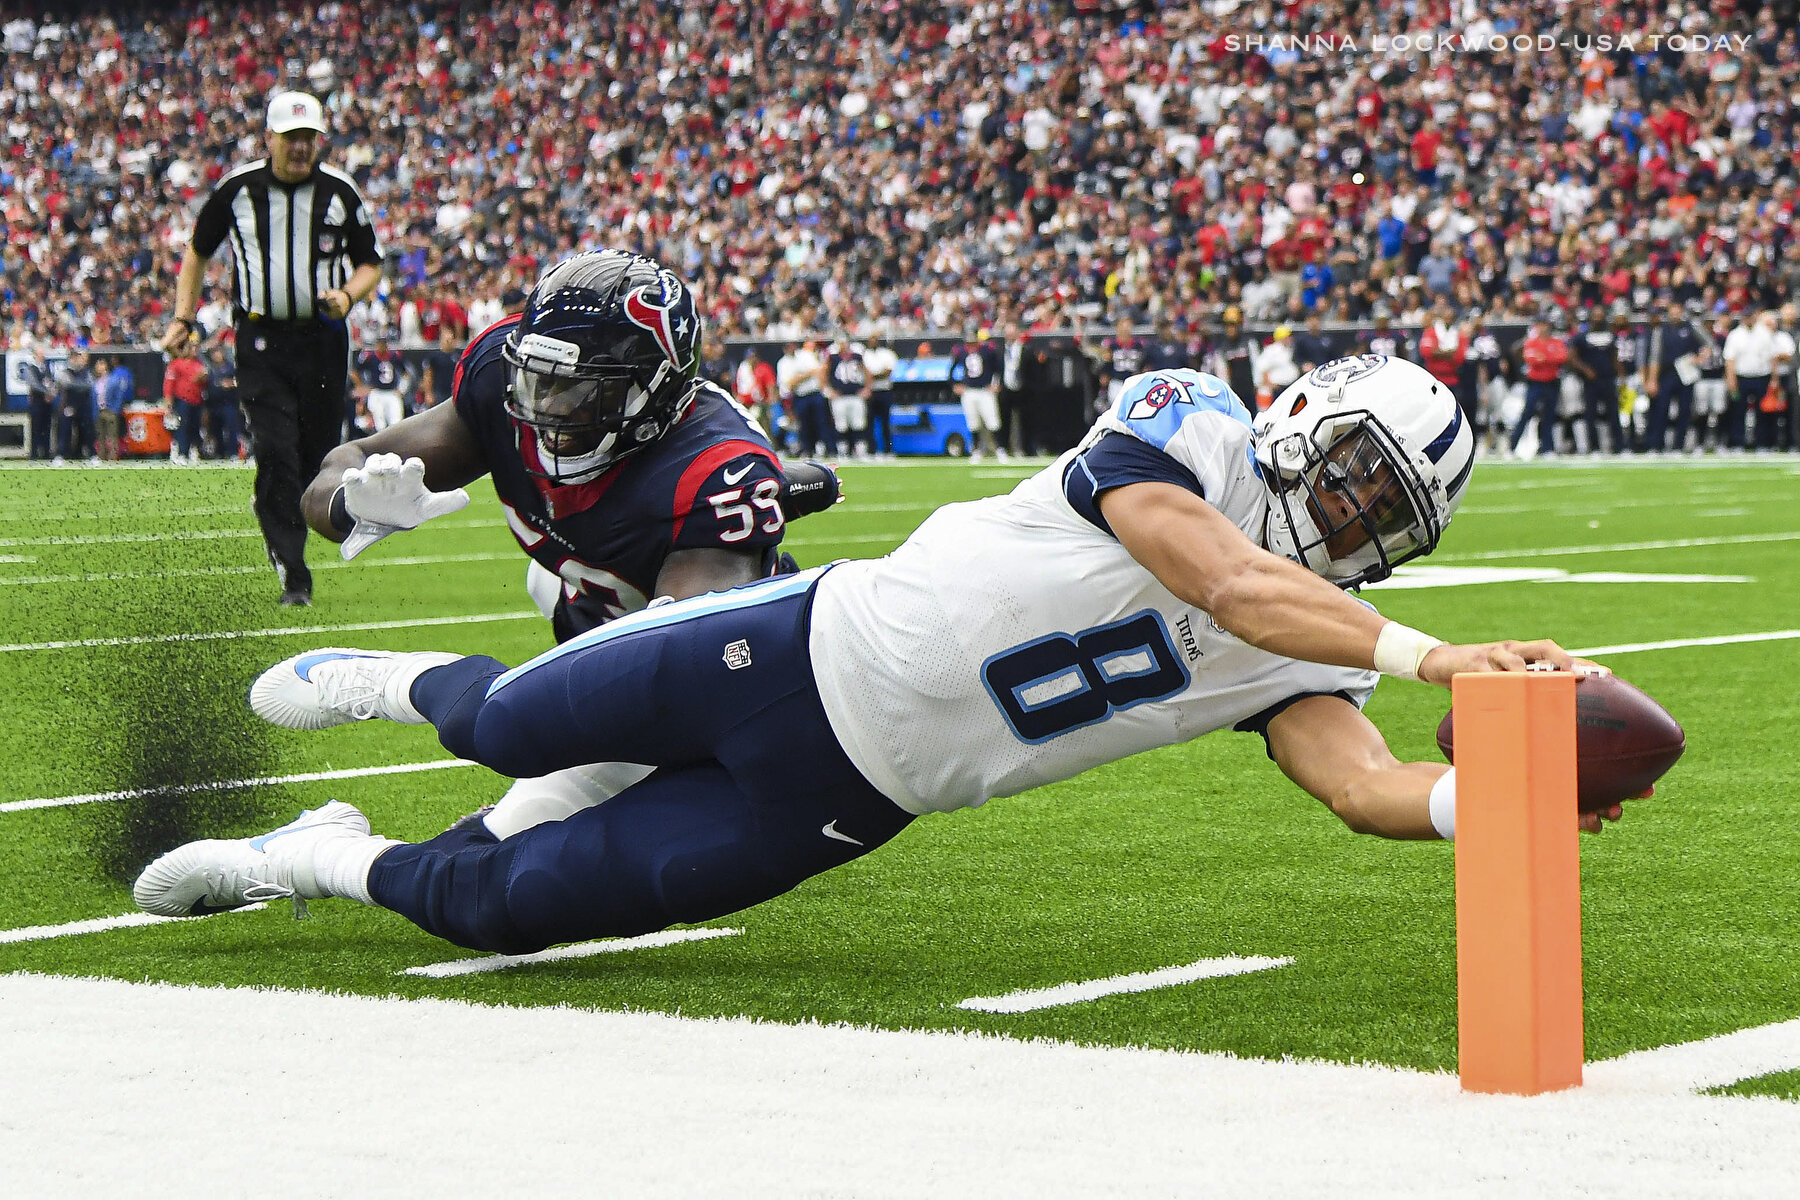  Oct 1, 2017; Houston, TX, USA; Tennessee Titans quarterback Marcus Mariota (8) scores a touchdown ahead of Houston Texans outside linebacker Whitney Mercilus (59) during the second quarter at NRG Stadium. Mandatory Credit: Shanna Lockwood-USA TODAY 